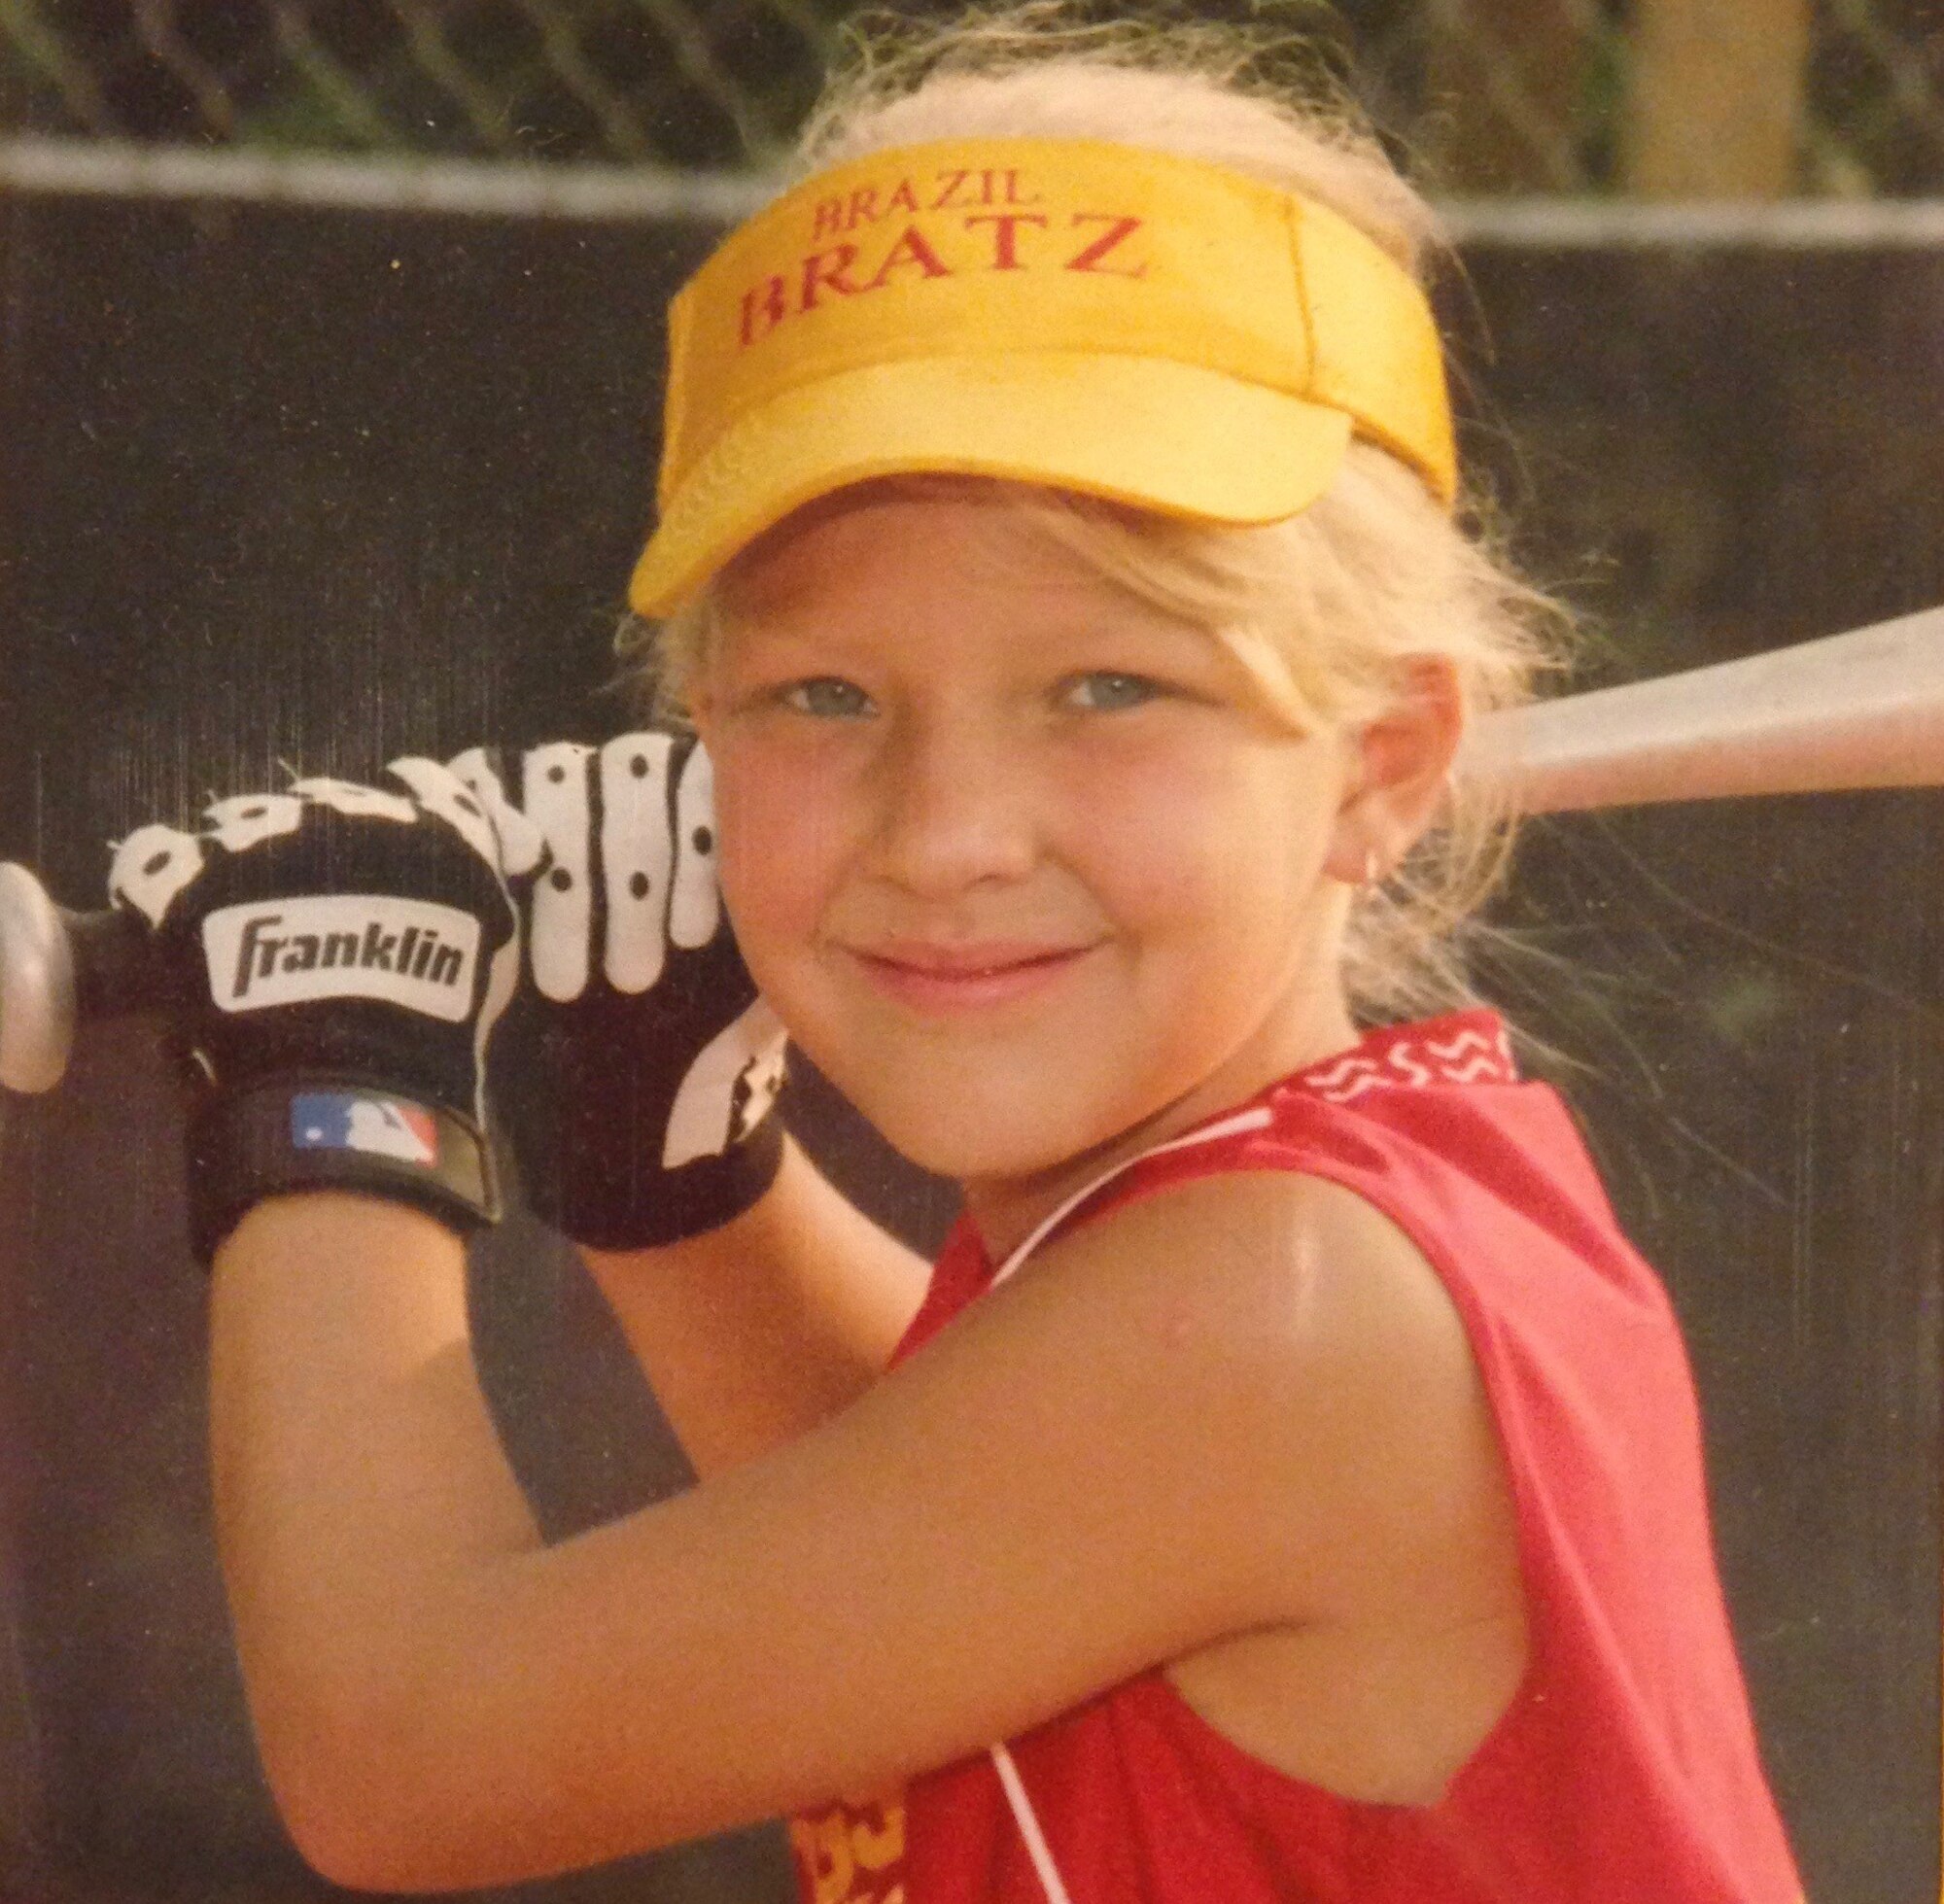 Tori Tilley poses for a softball portrait as a child, in Brazil, Indiana. More than 10 years later Senior Airman Tori Tilley played for the 2018 U.S. Armed Forces Women’s Softball Team. (Courtesy photo)